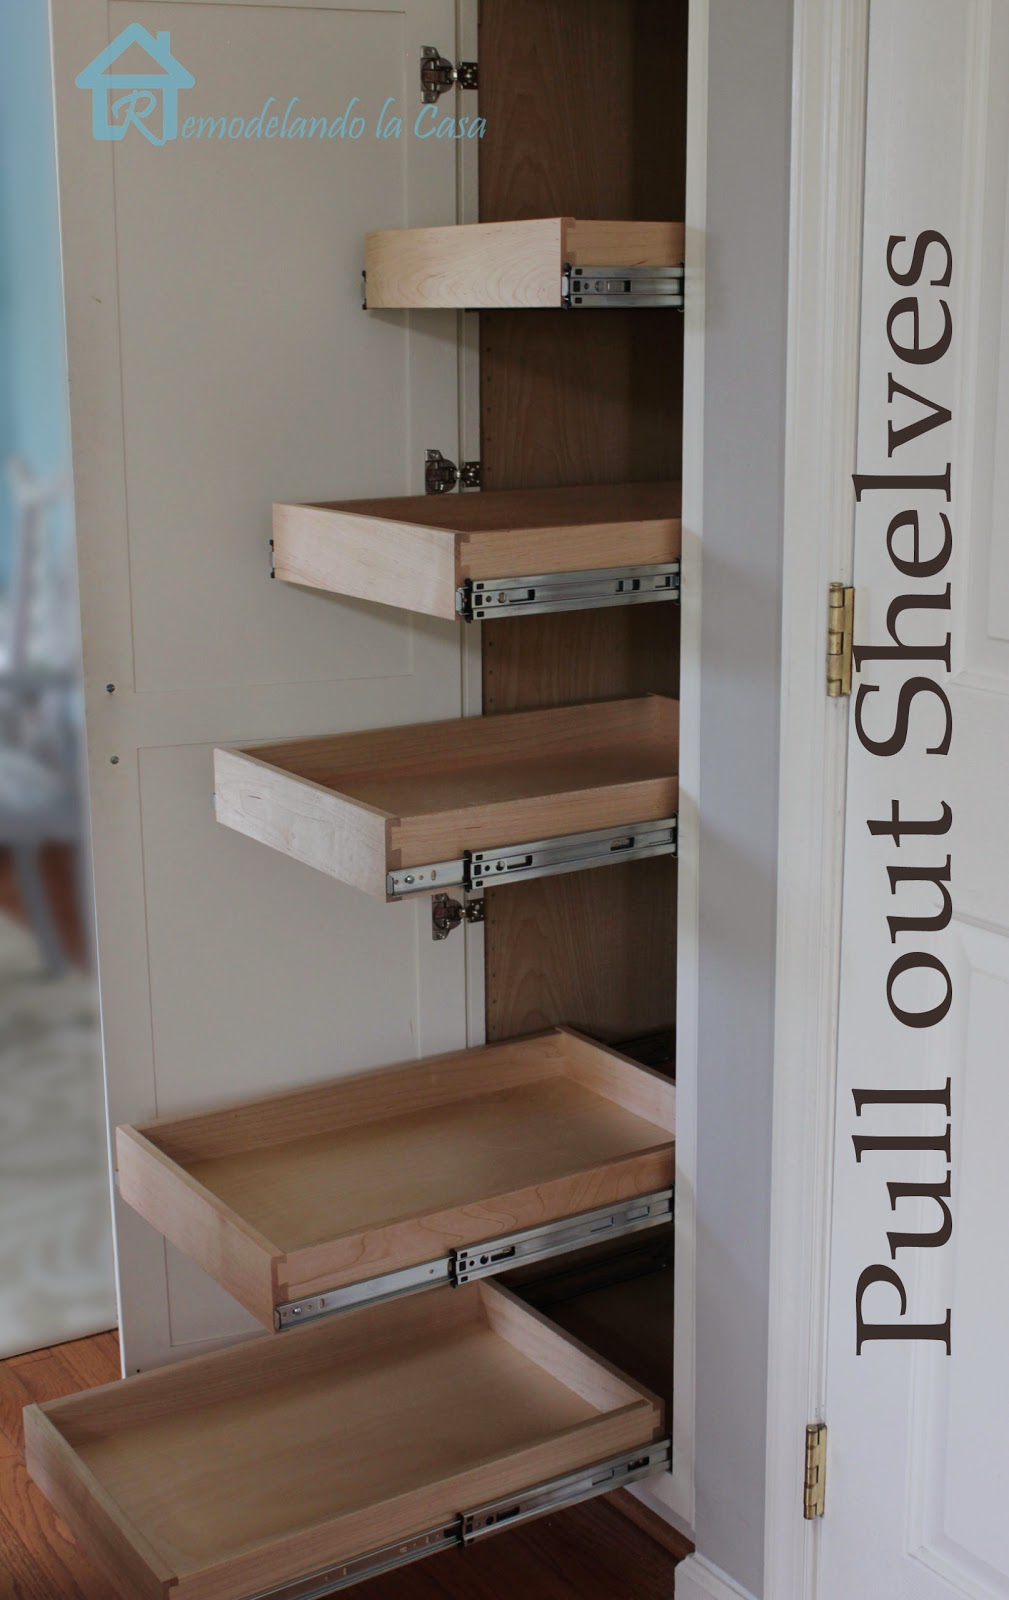 Kitchen Organization - Pull Out Shelves in Pantry ...